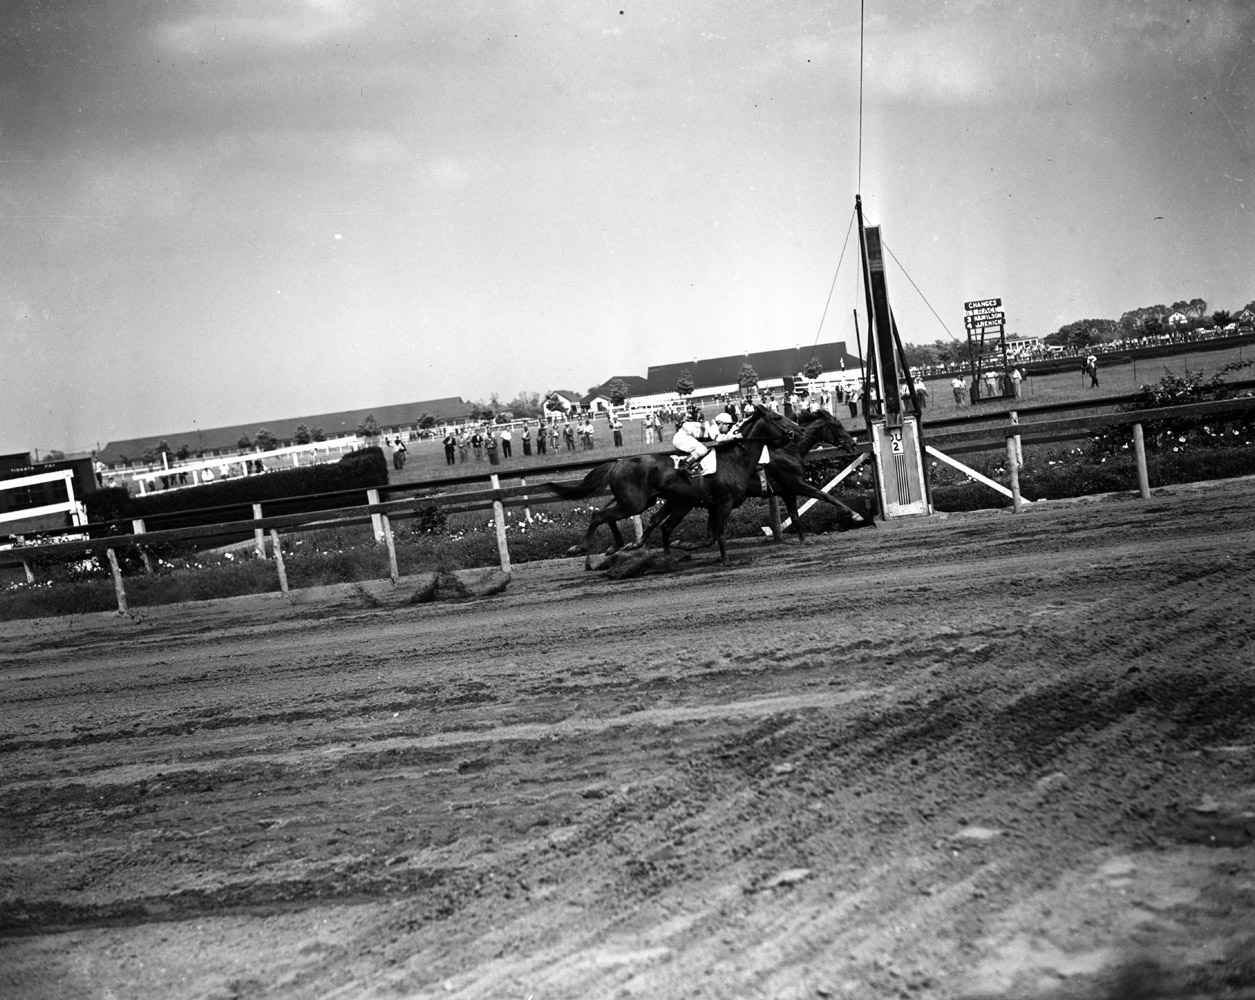 Gallorette (Job D. Jessop up) defeating Stymie in the 1946 Brooklyn Handicap at Aqueduct (Keeneland Library Morgan Collection/Museum Collection)